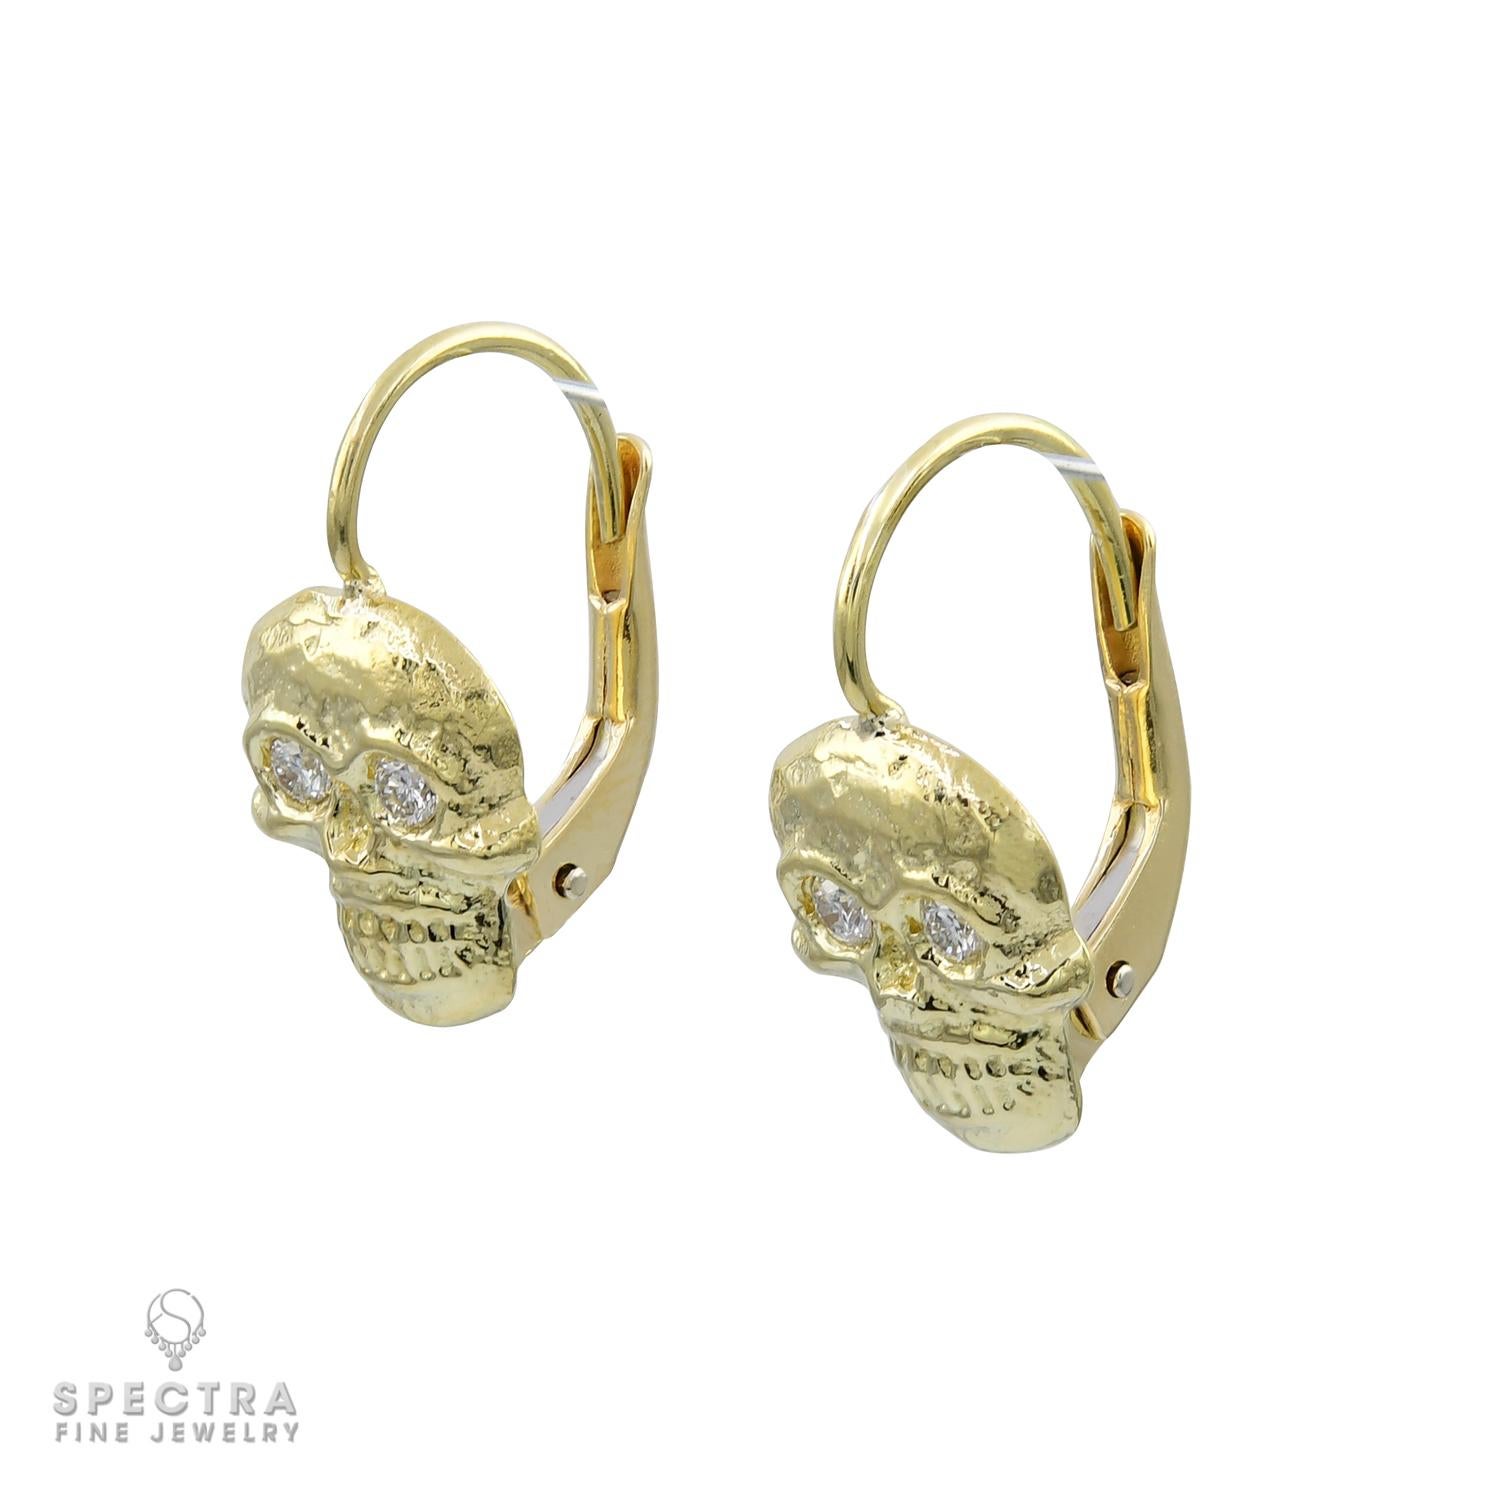 These lovely earrings featuring unique skull motifs are crafted from lustrous 18k yellow gold, weighing a total of 4.80 grams and measuring approximately 0.5